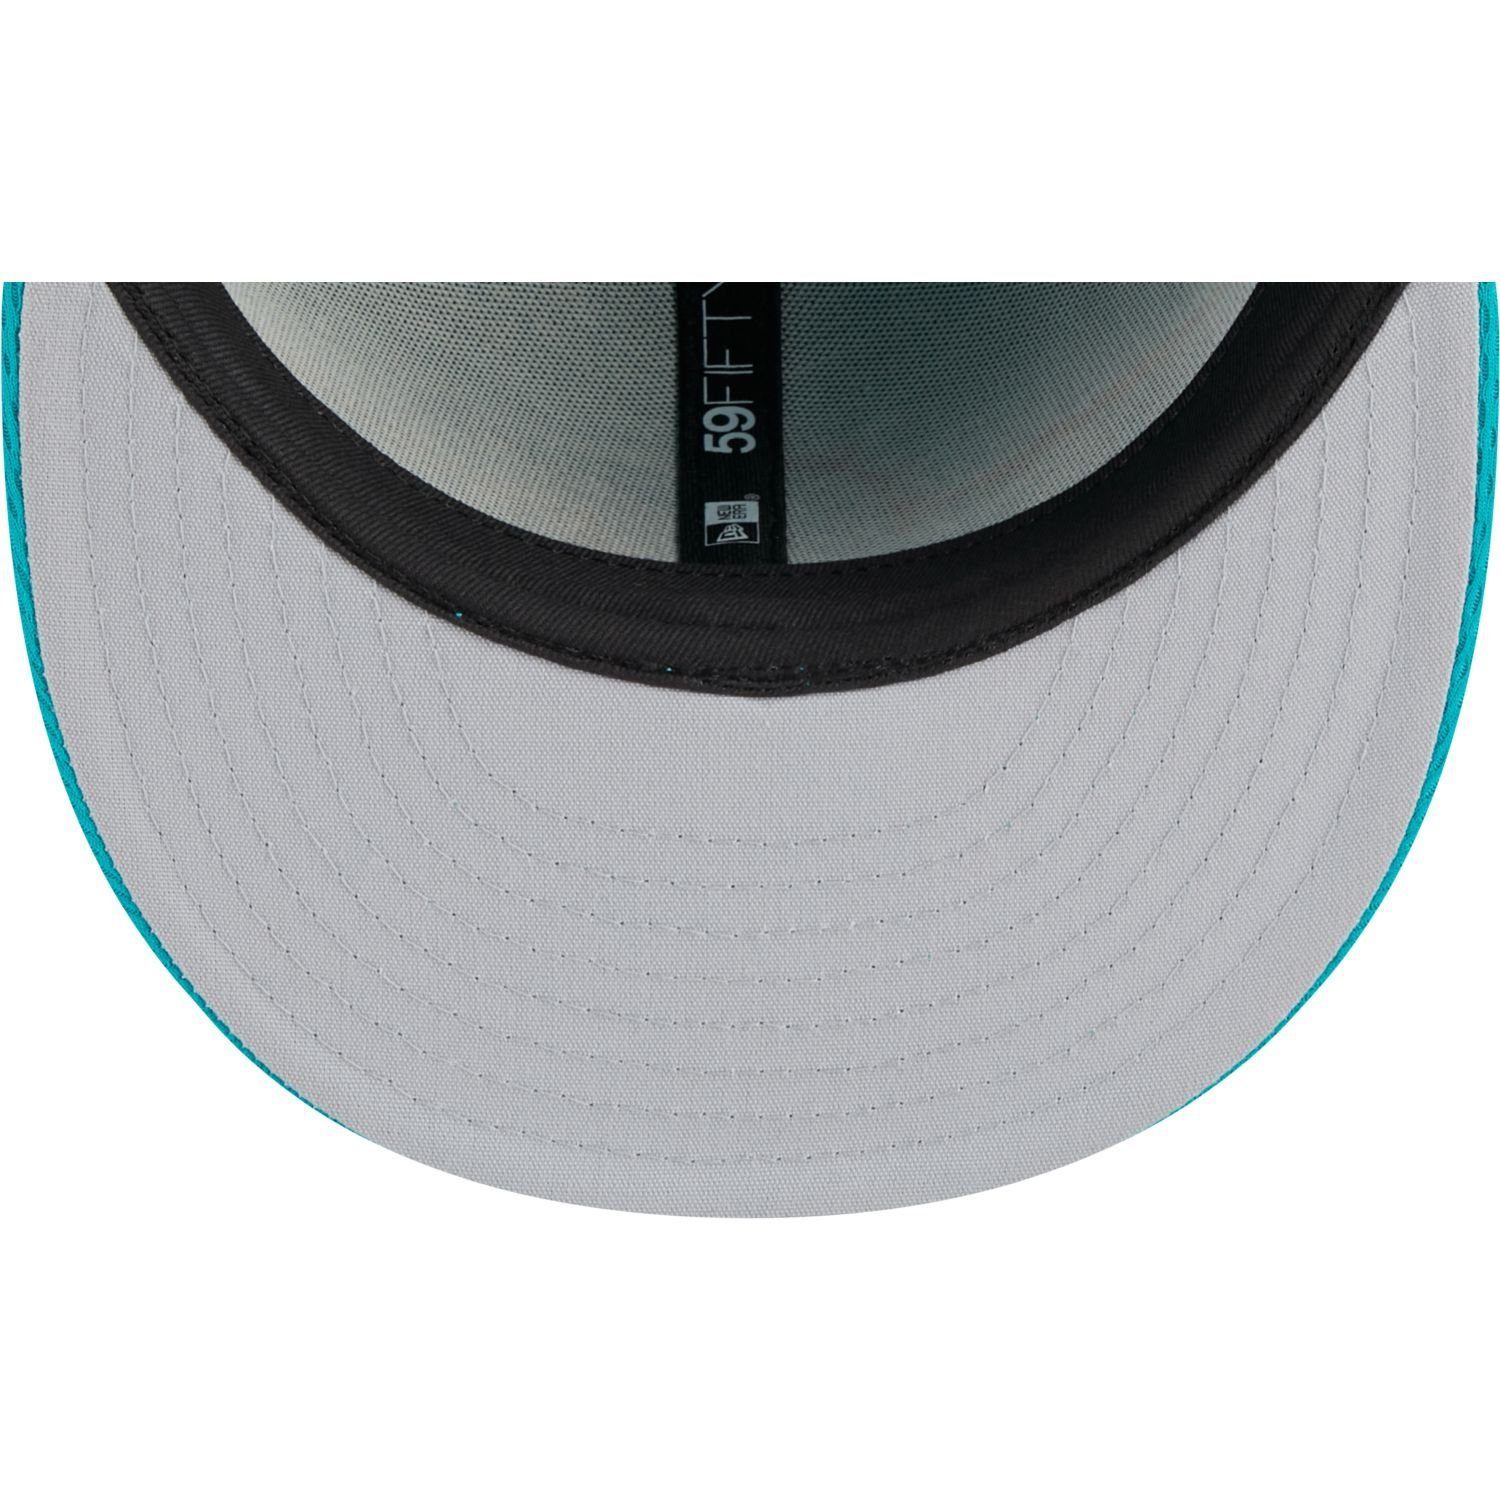 New Dolphins Miami Era Fitted Cap NFL TRAINING 59Fifty